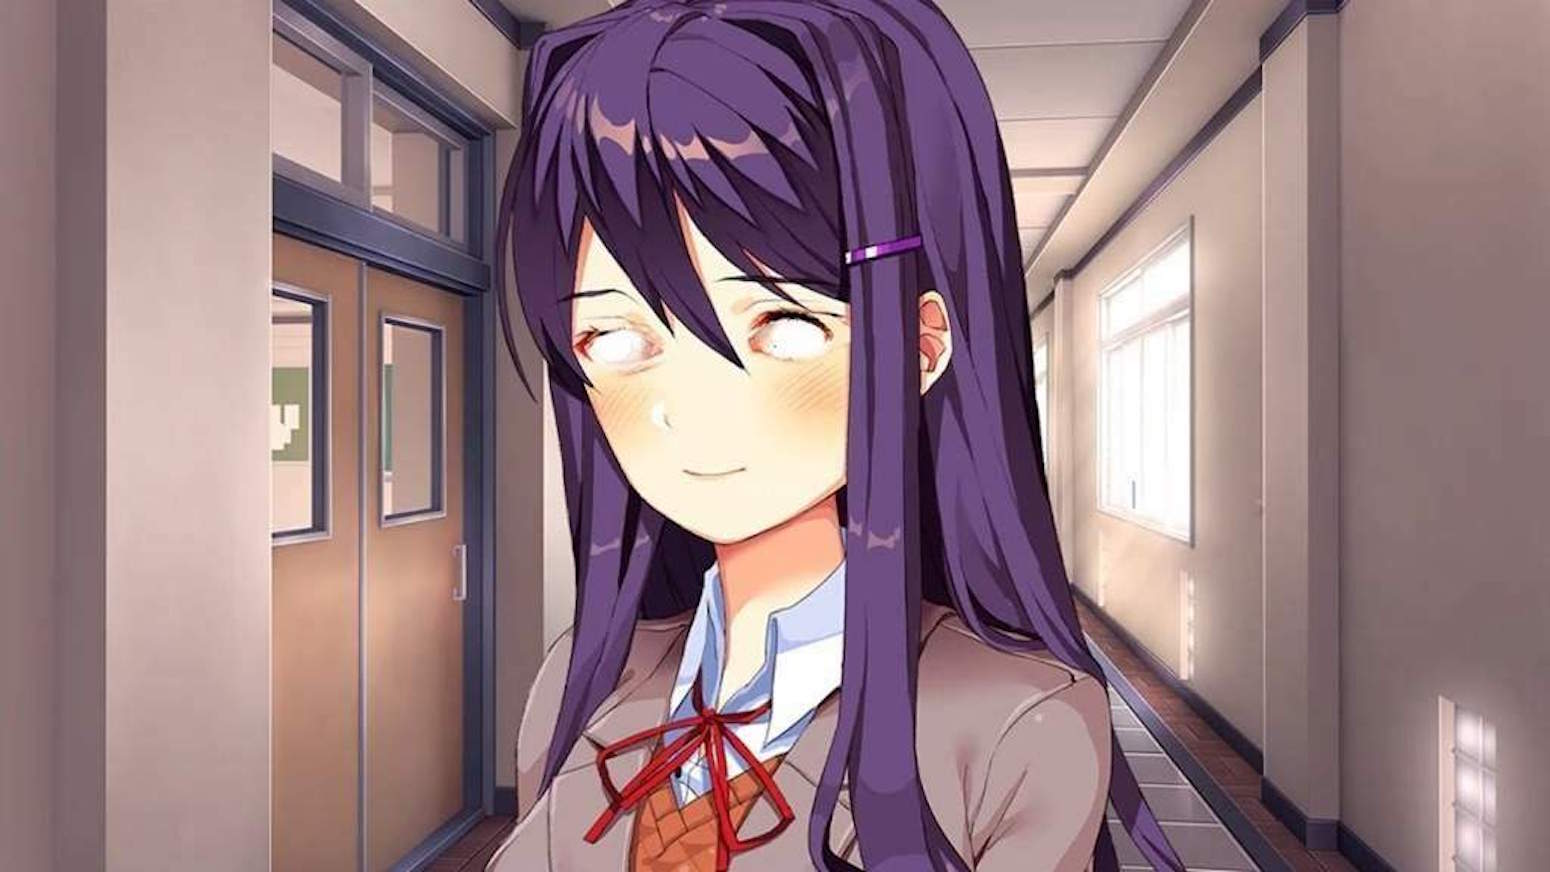 What Is Doki Doki Literature Club And Why Is It Causing Moral Panic